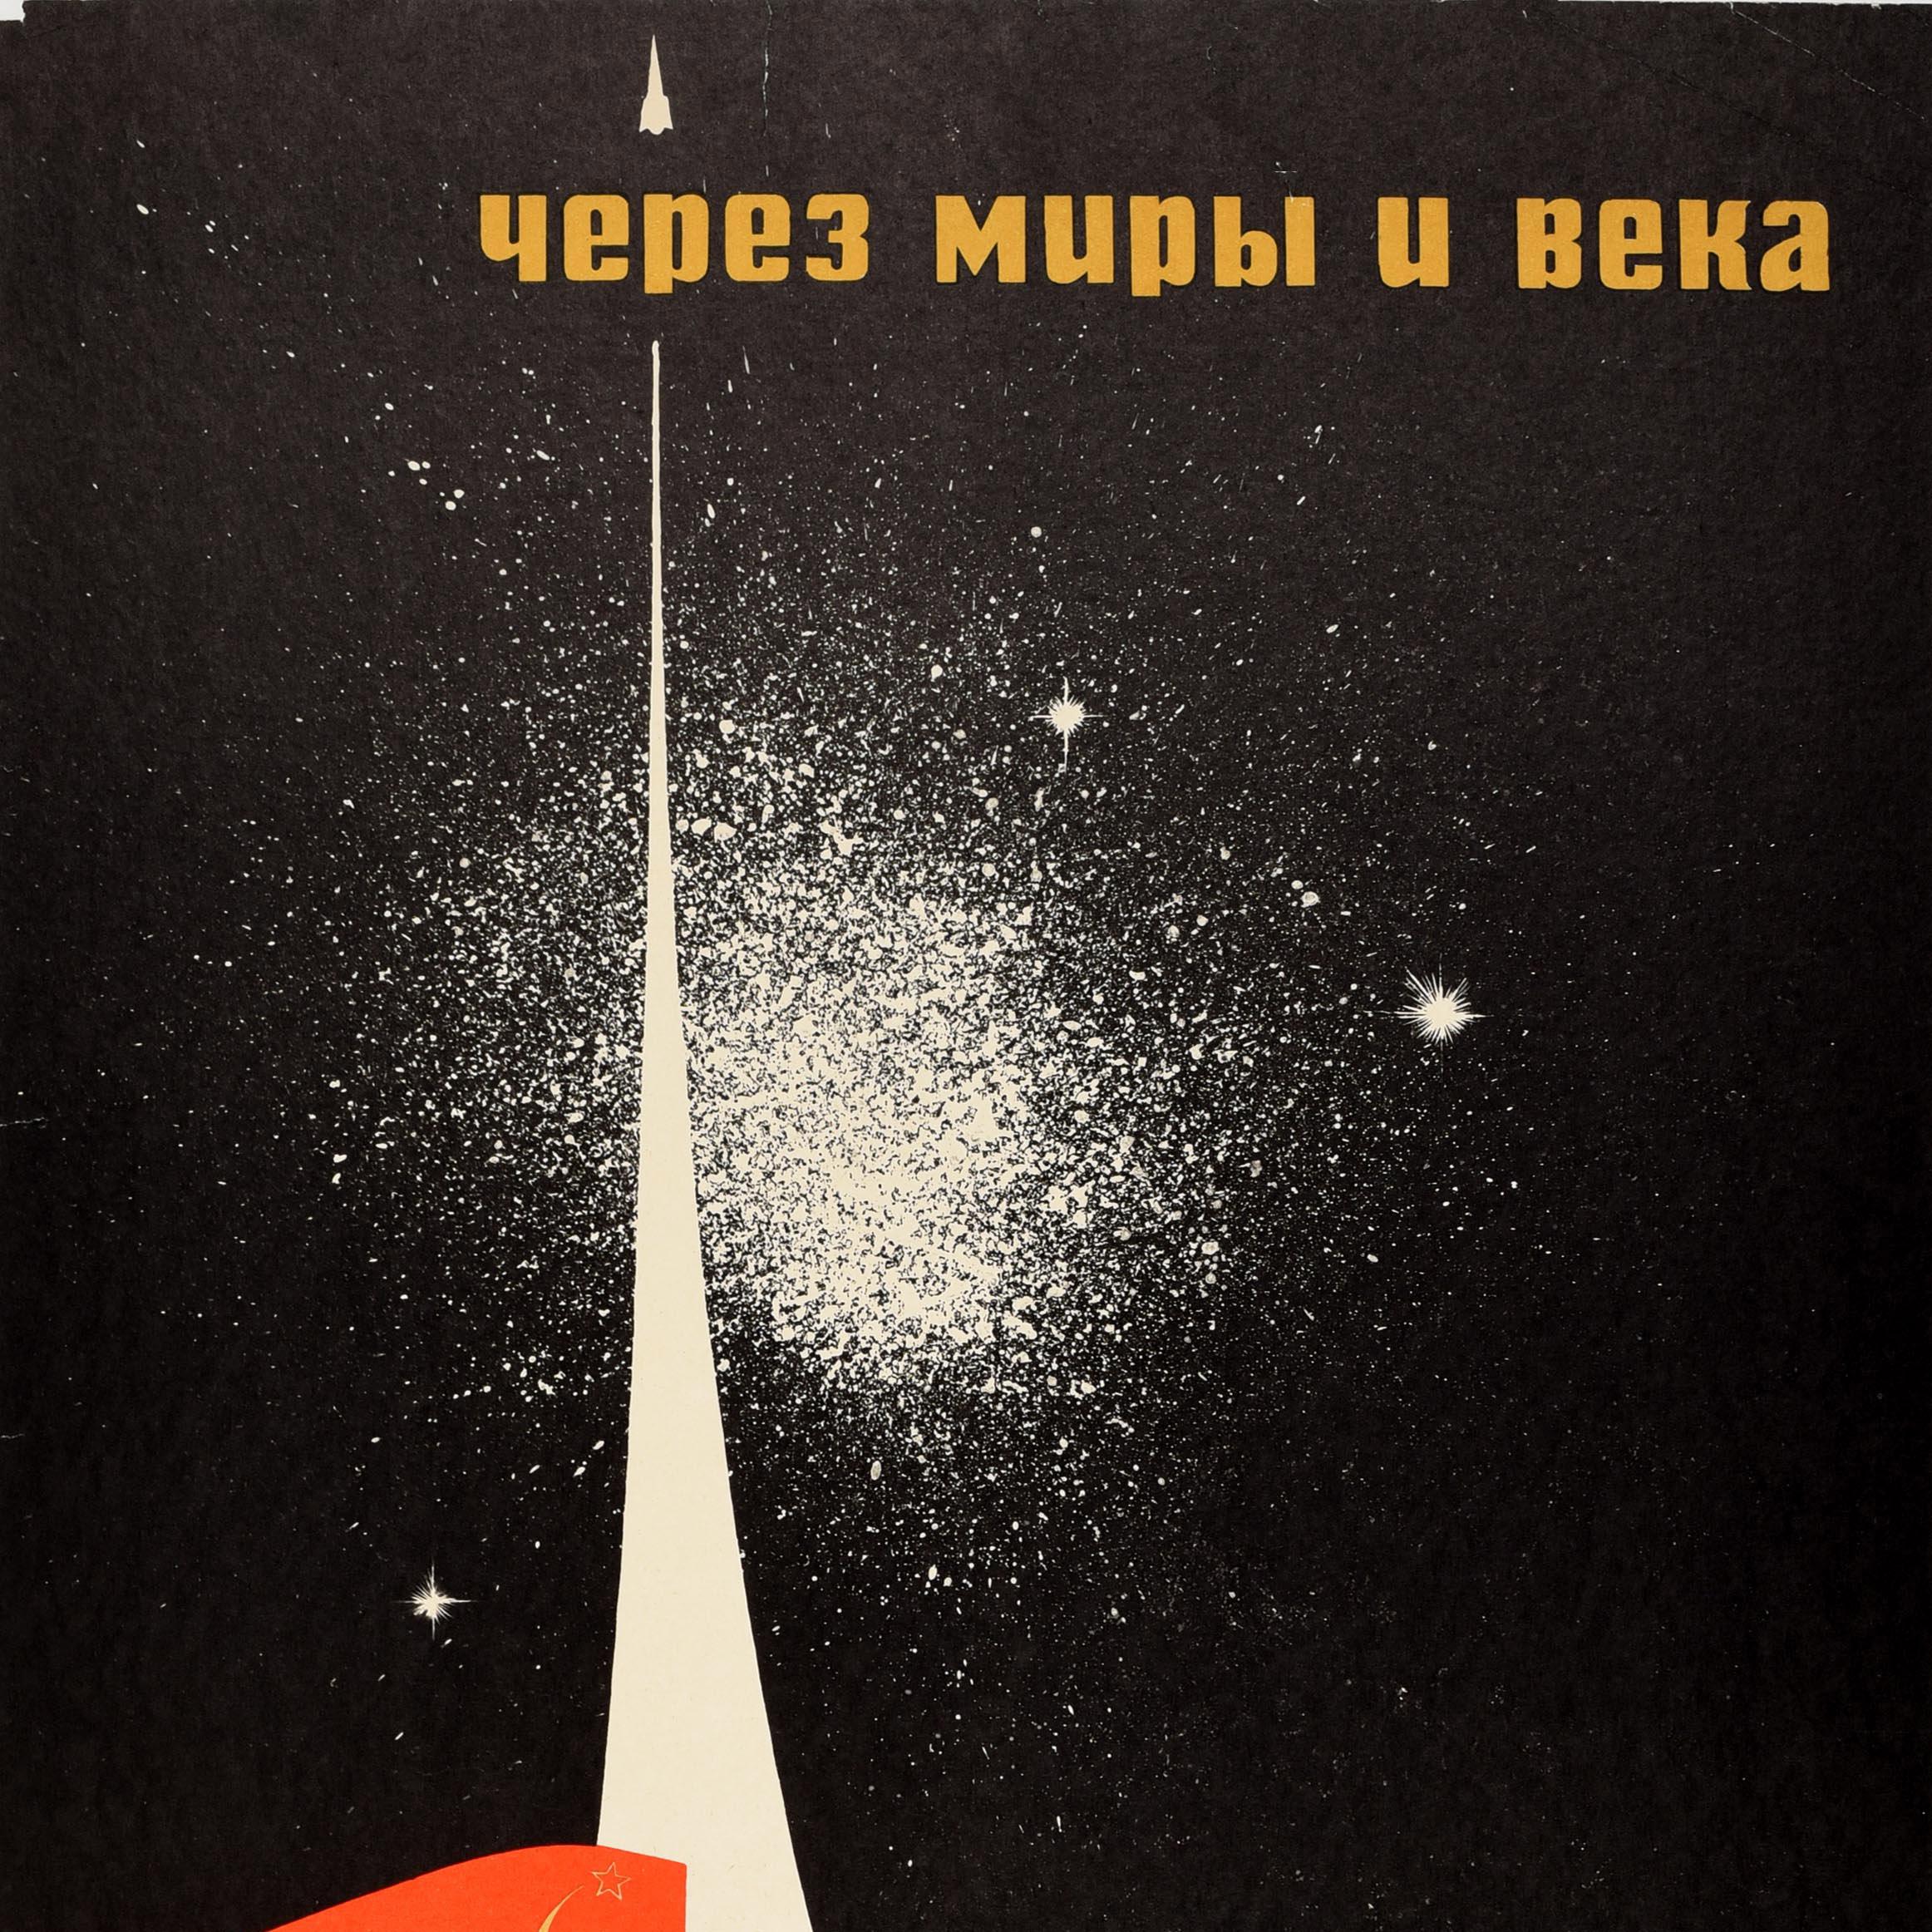 Original vintage Soviet propaganda poster - Through Worlds and Ages / Через Миры и Века - featuring a stunning design depicting a man holding a flag in red with a Soviet hammer and sickle emblem on it, walking up a white rocket trail leading to the